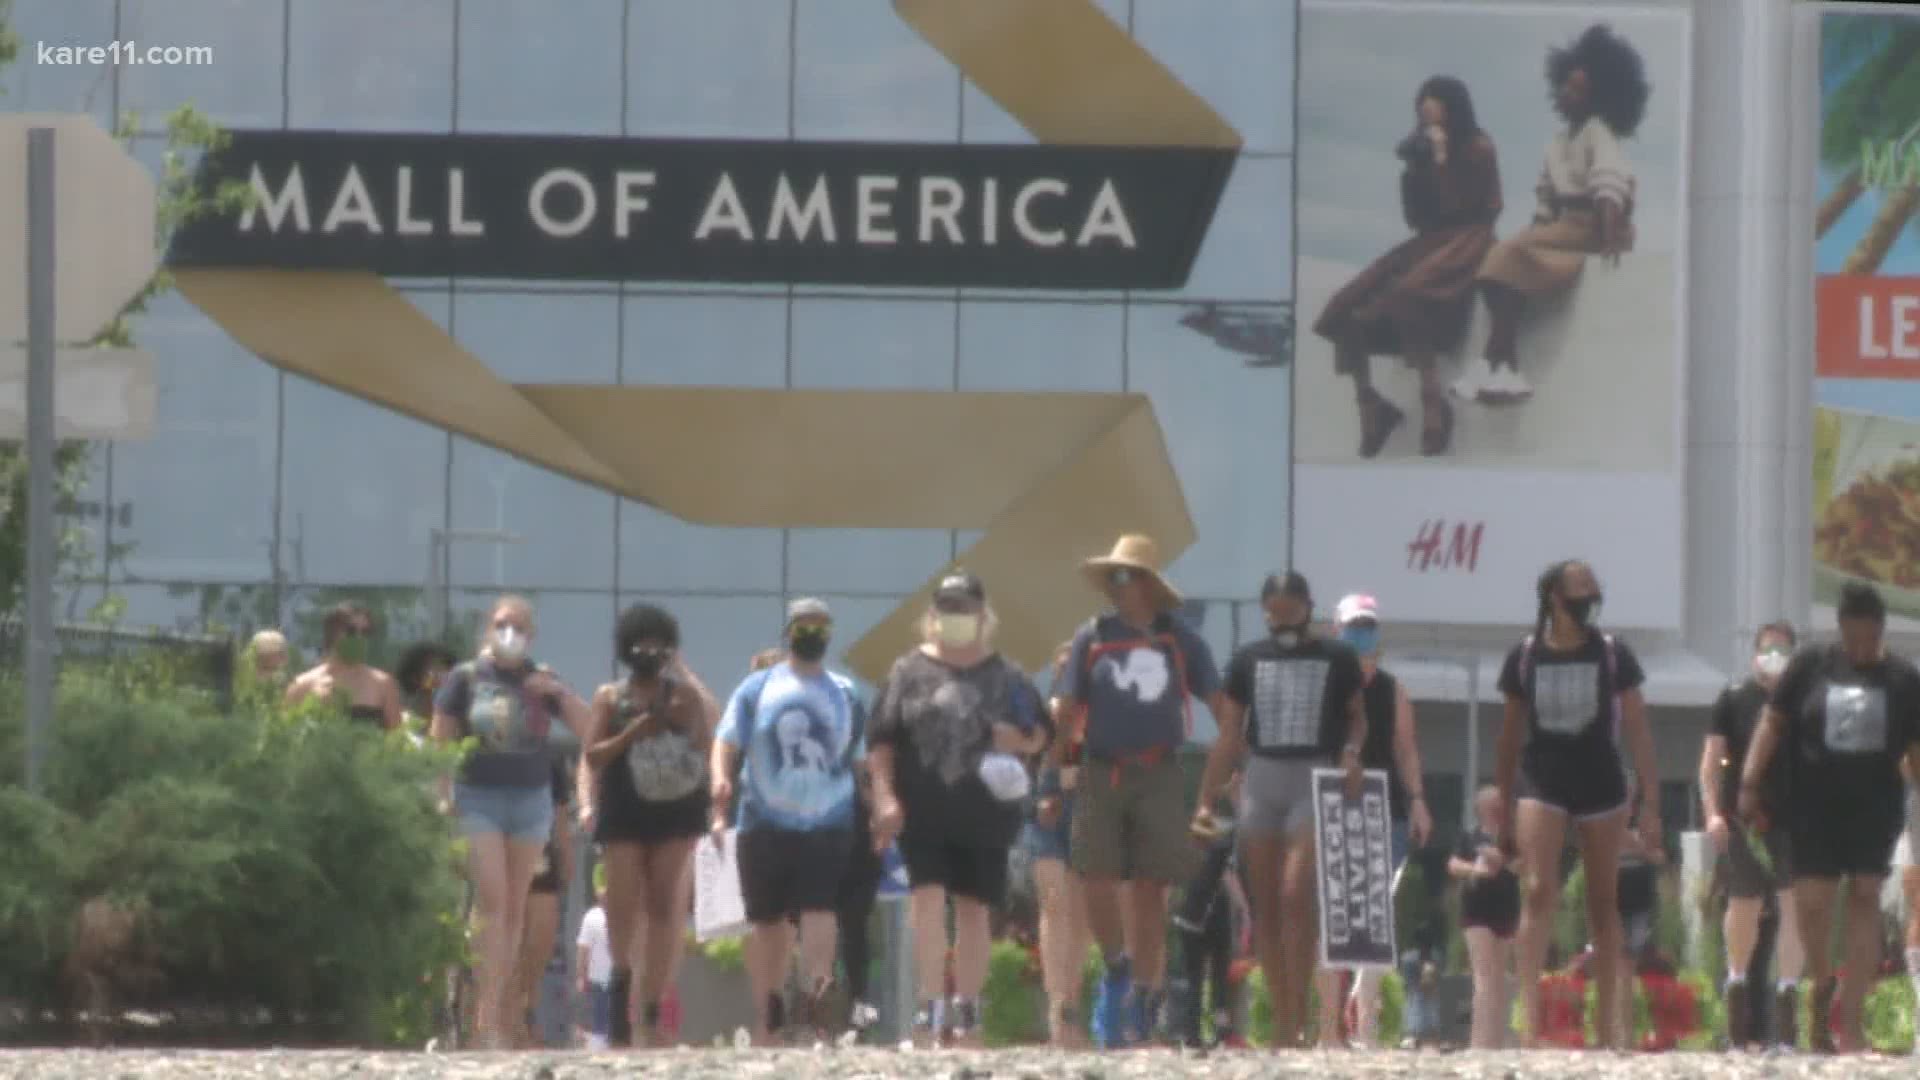 A group of protesters were joined by the Black Panthers organization and marched from Mall of America to George Floyd's memorial site.